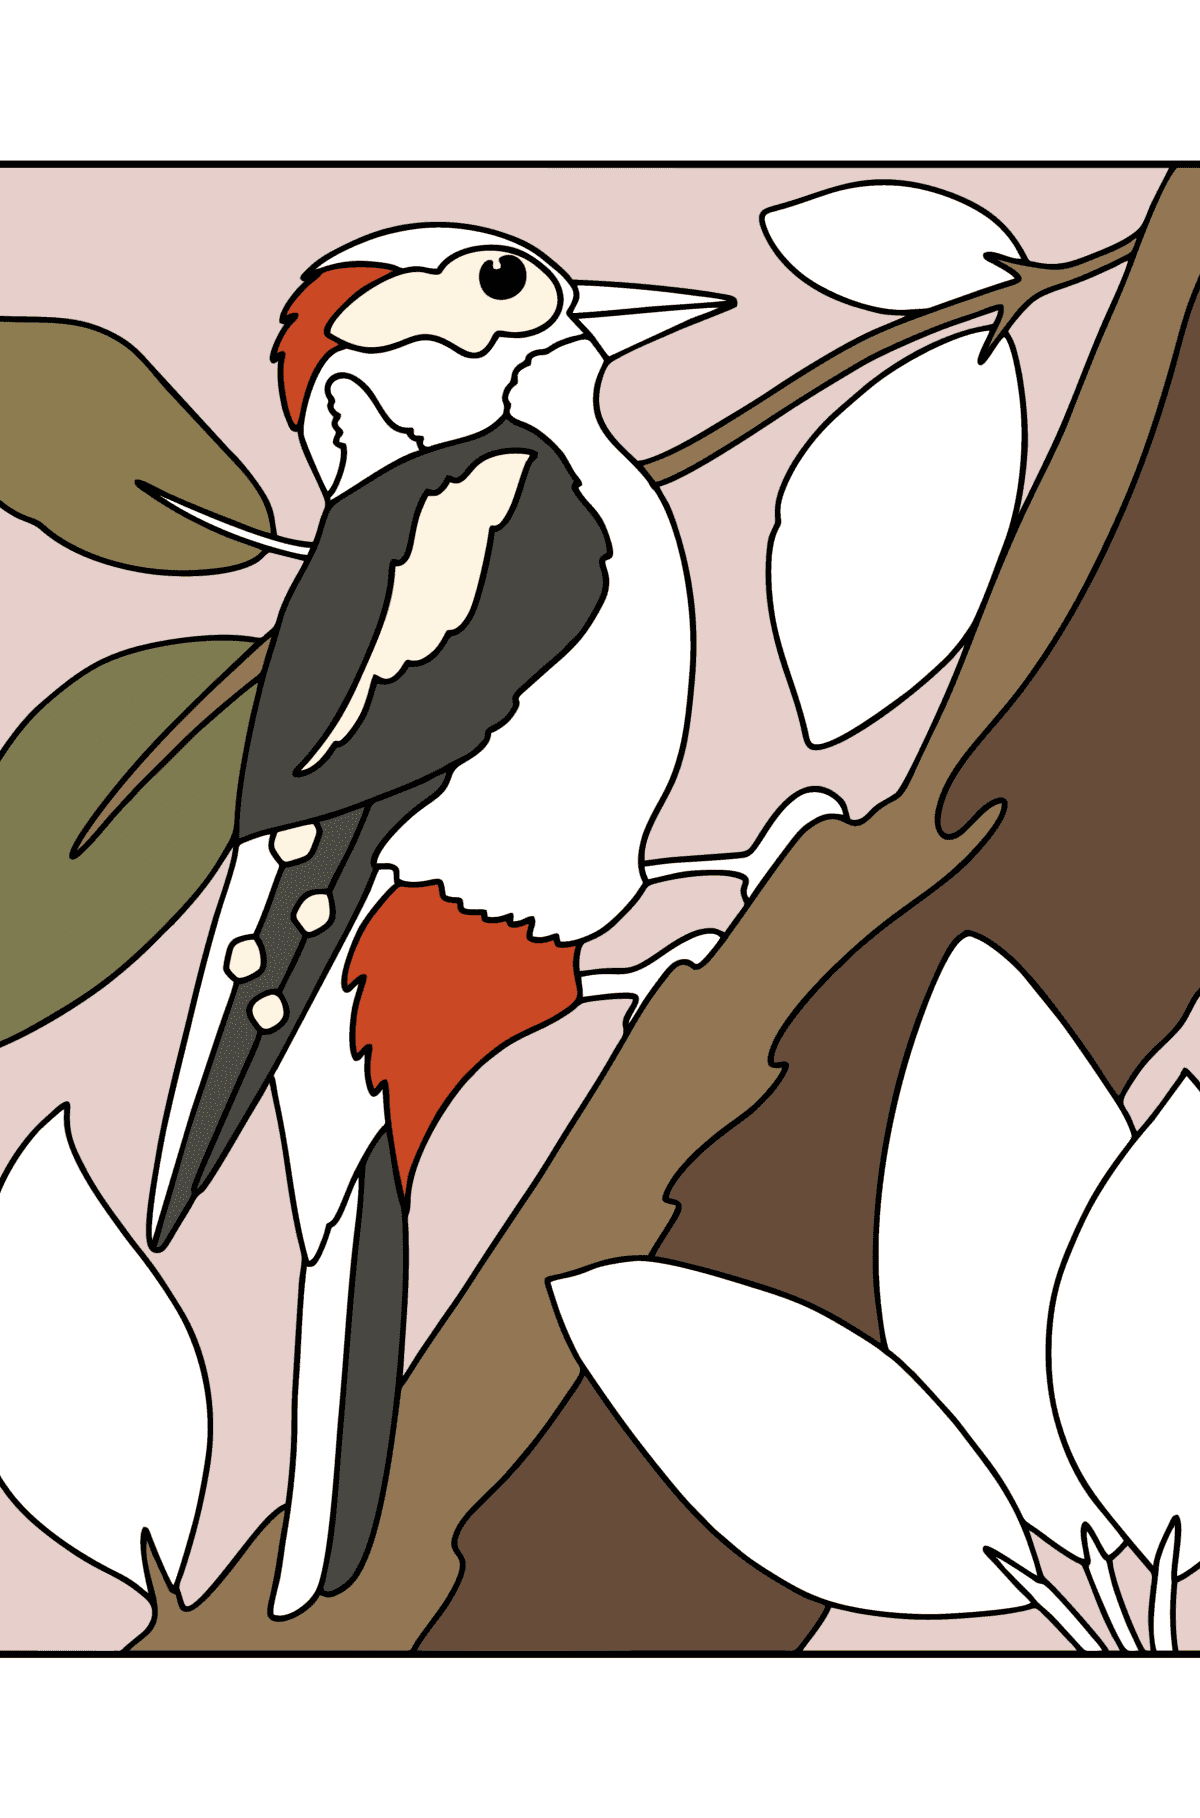 Woodpecker in the forest сoloring page - Coloring Pages for Kids